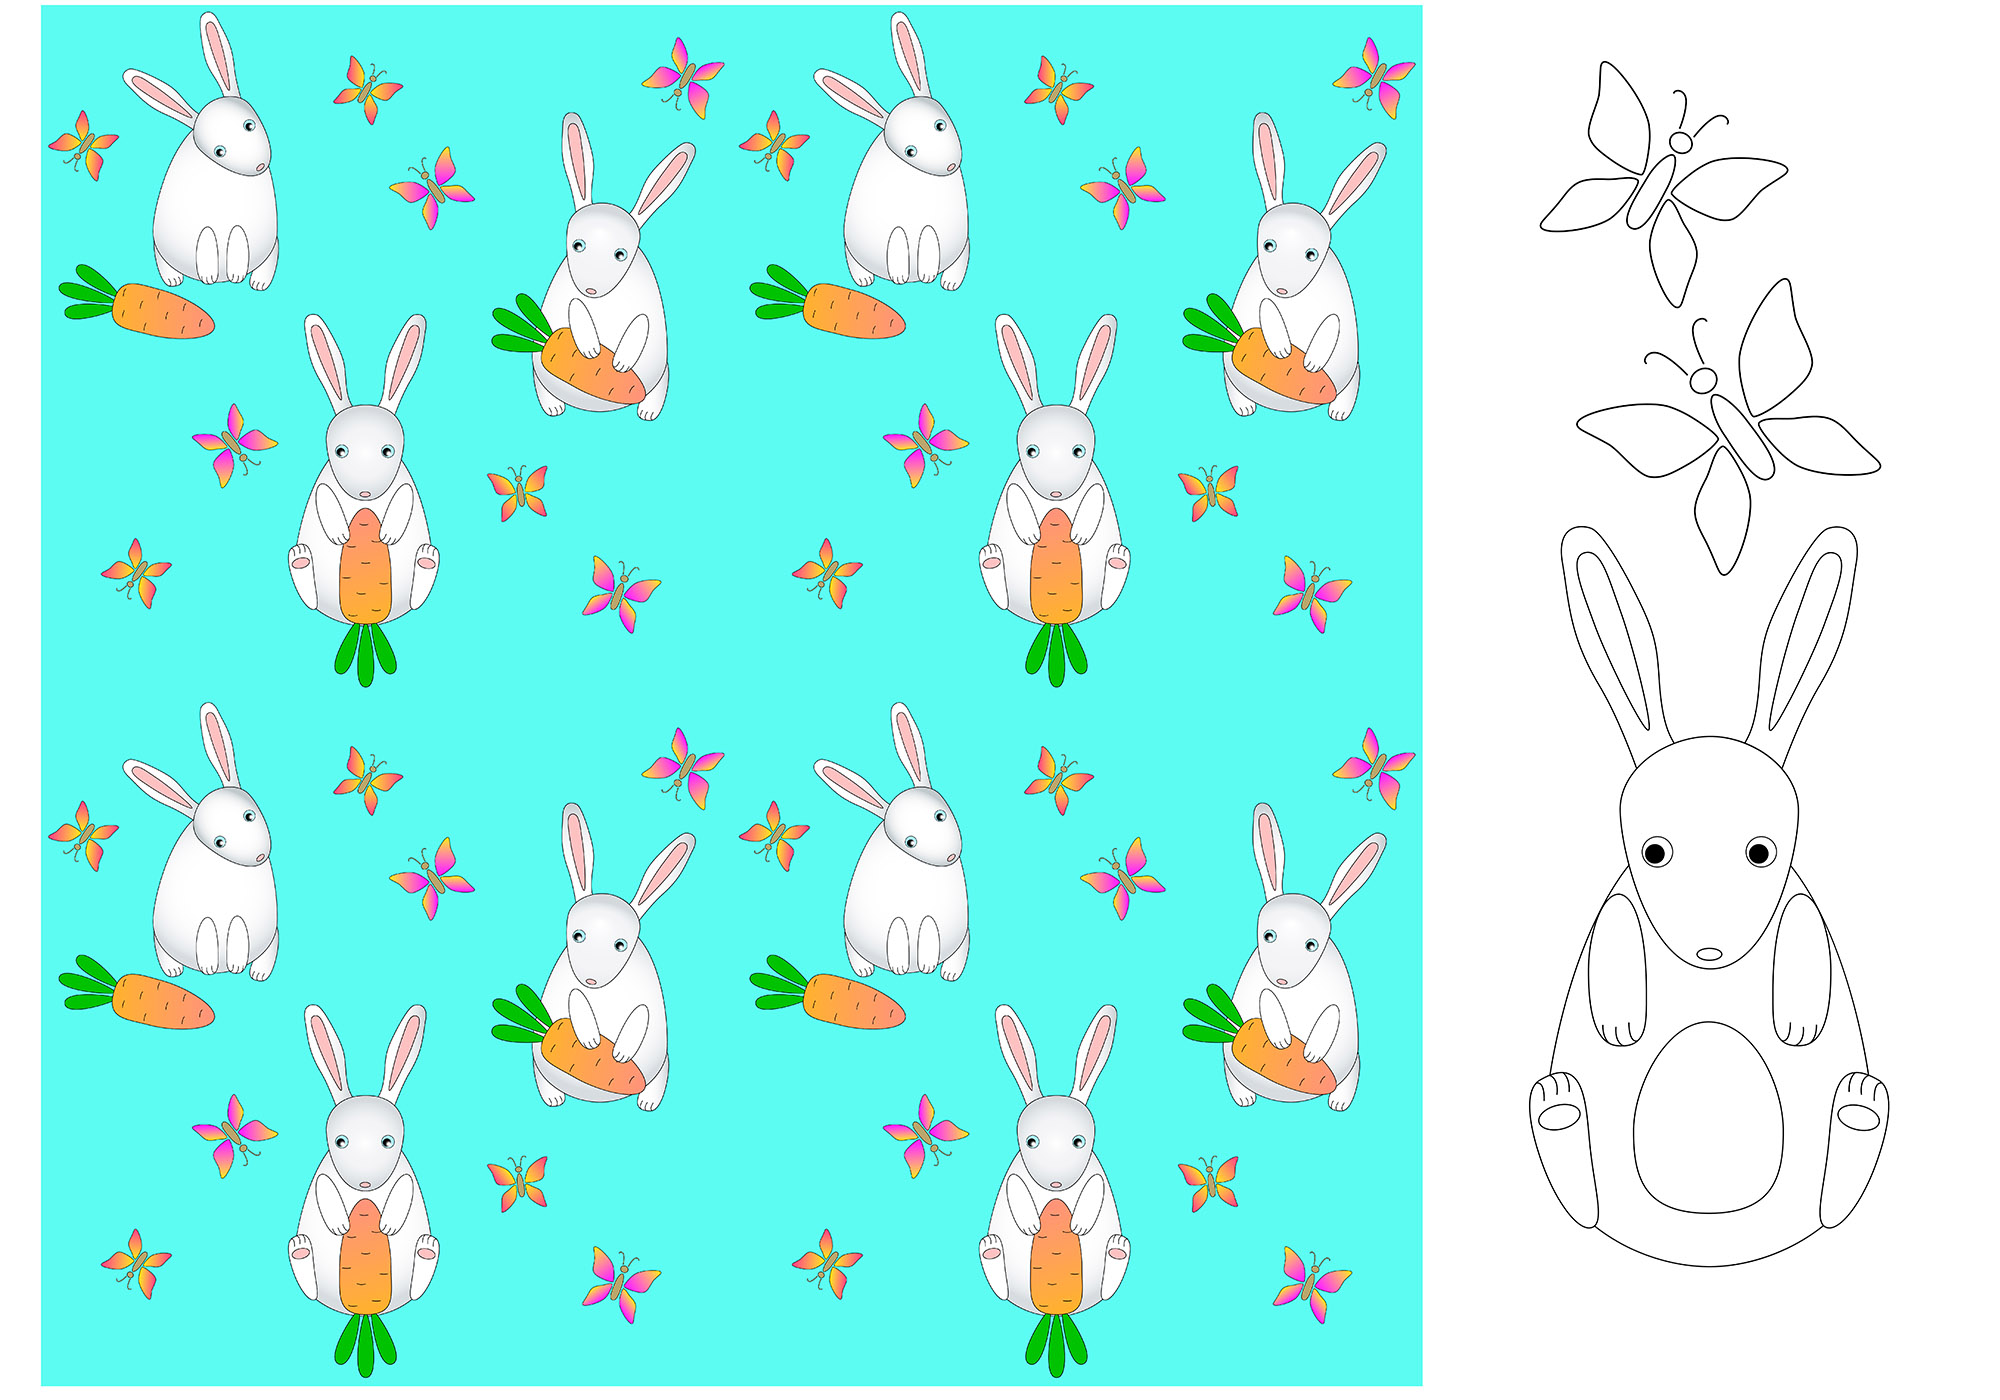 Drawing of a rabbit with carrots and flowers.